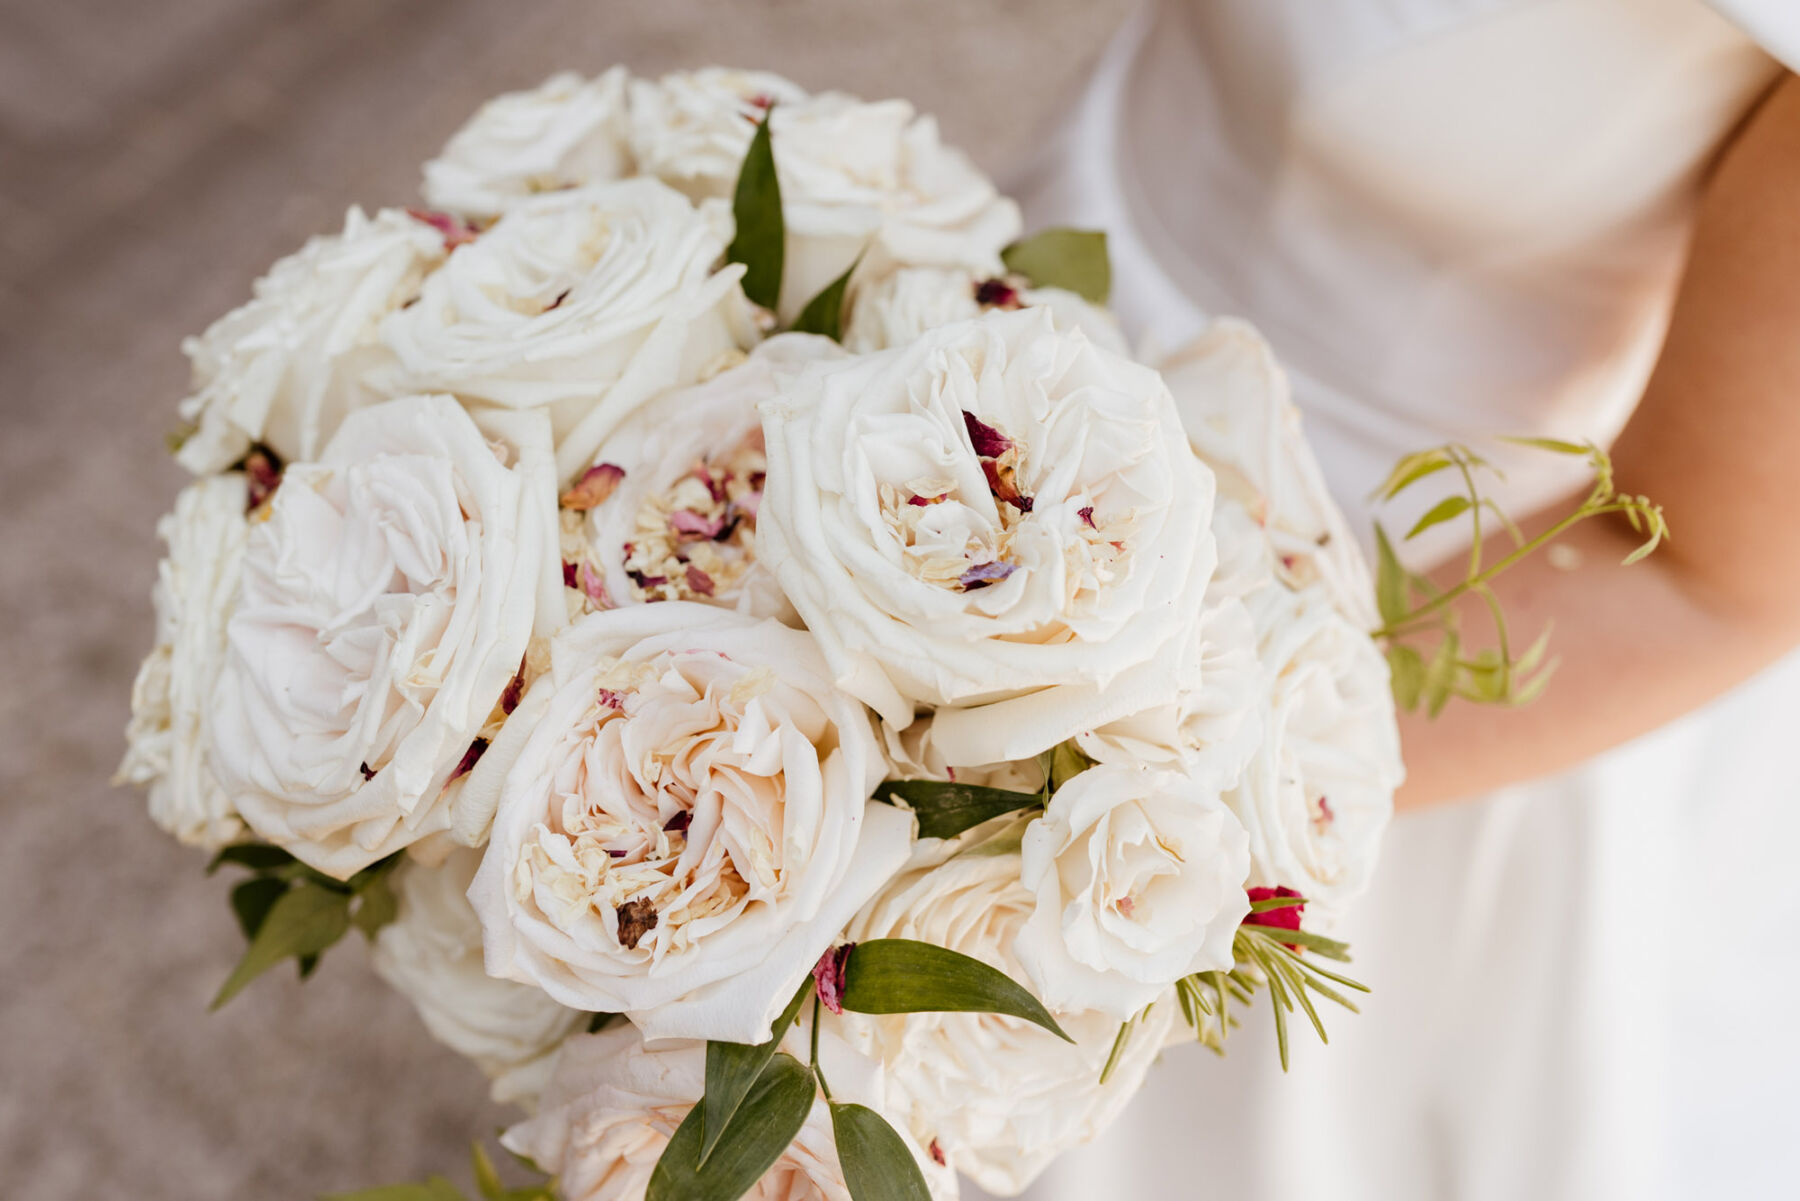 Bouquet of white roses by Mad Lilies Wedding Florist.